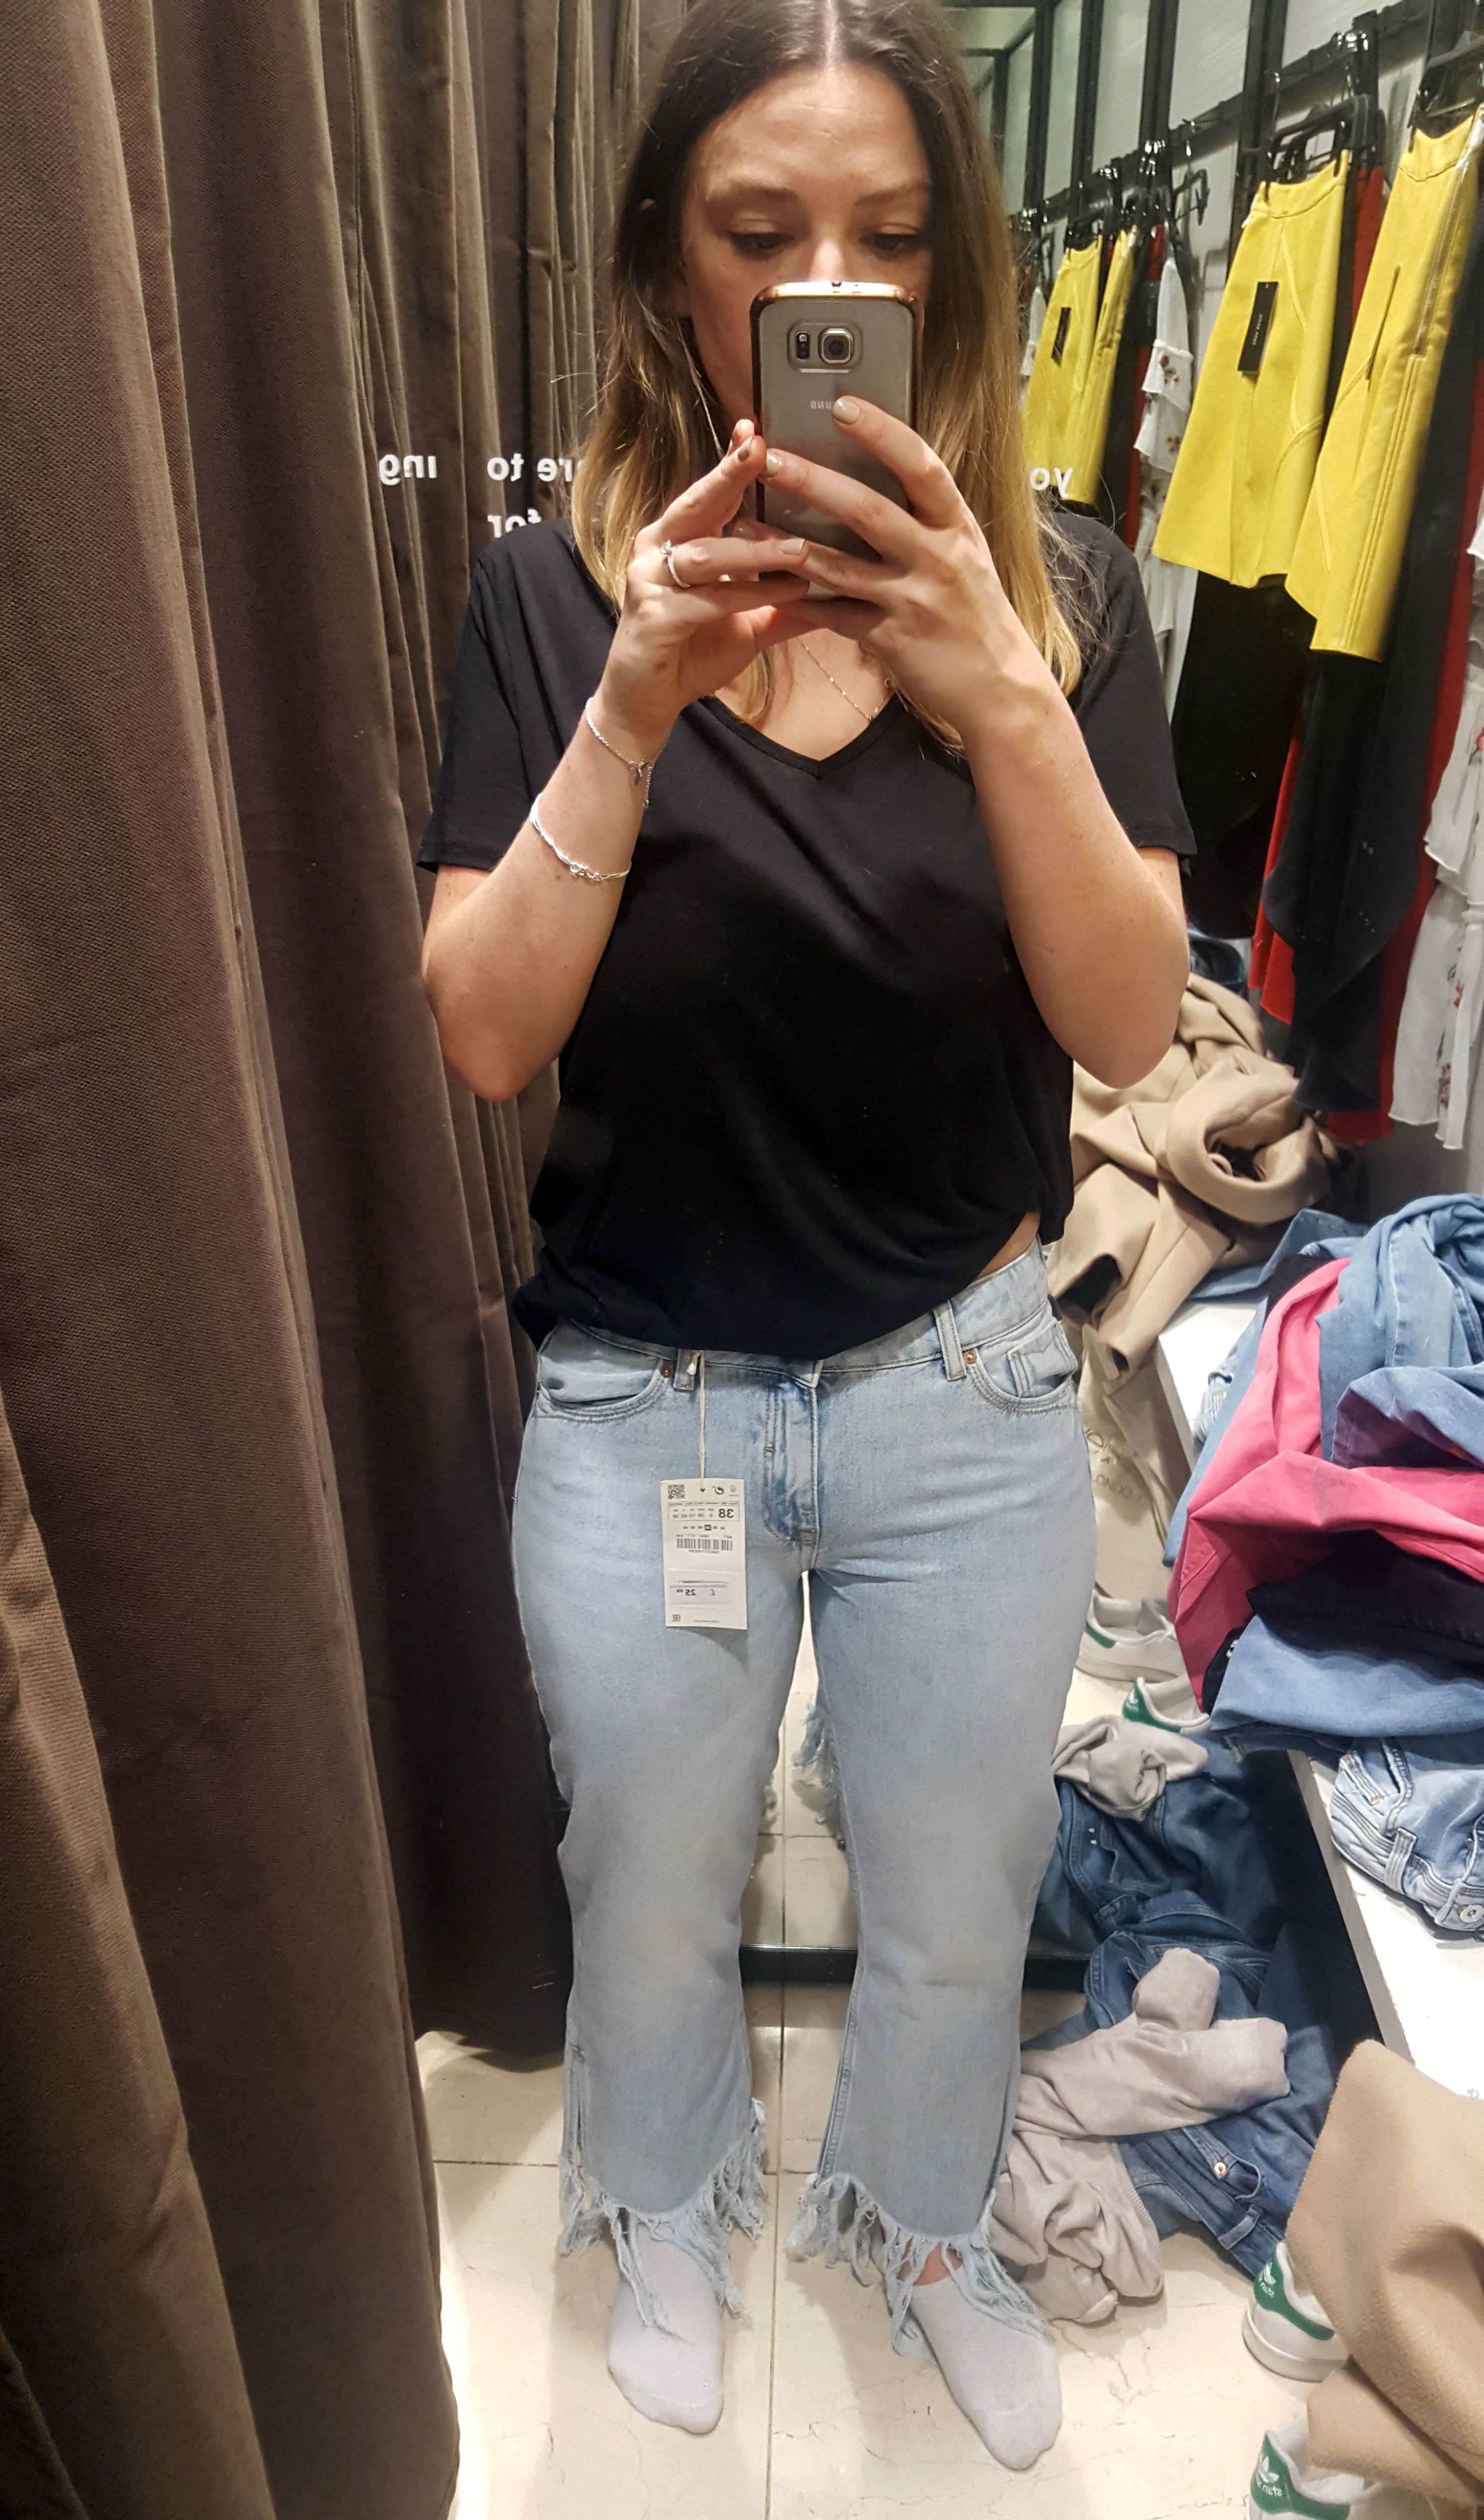 Proof that Zara clothing sizes are BS: in pictures